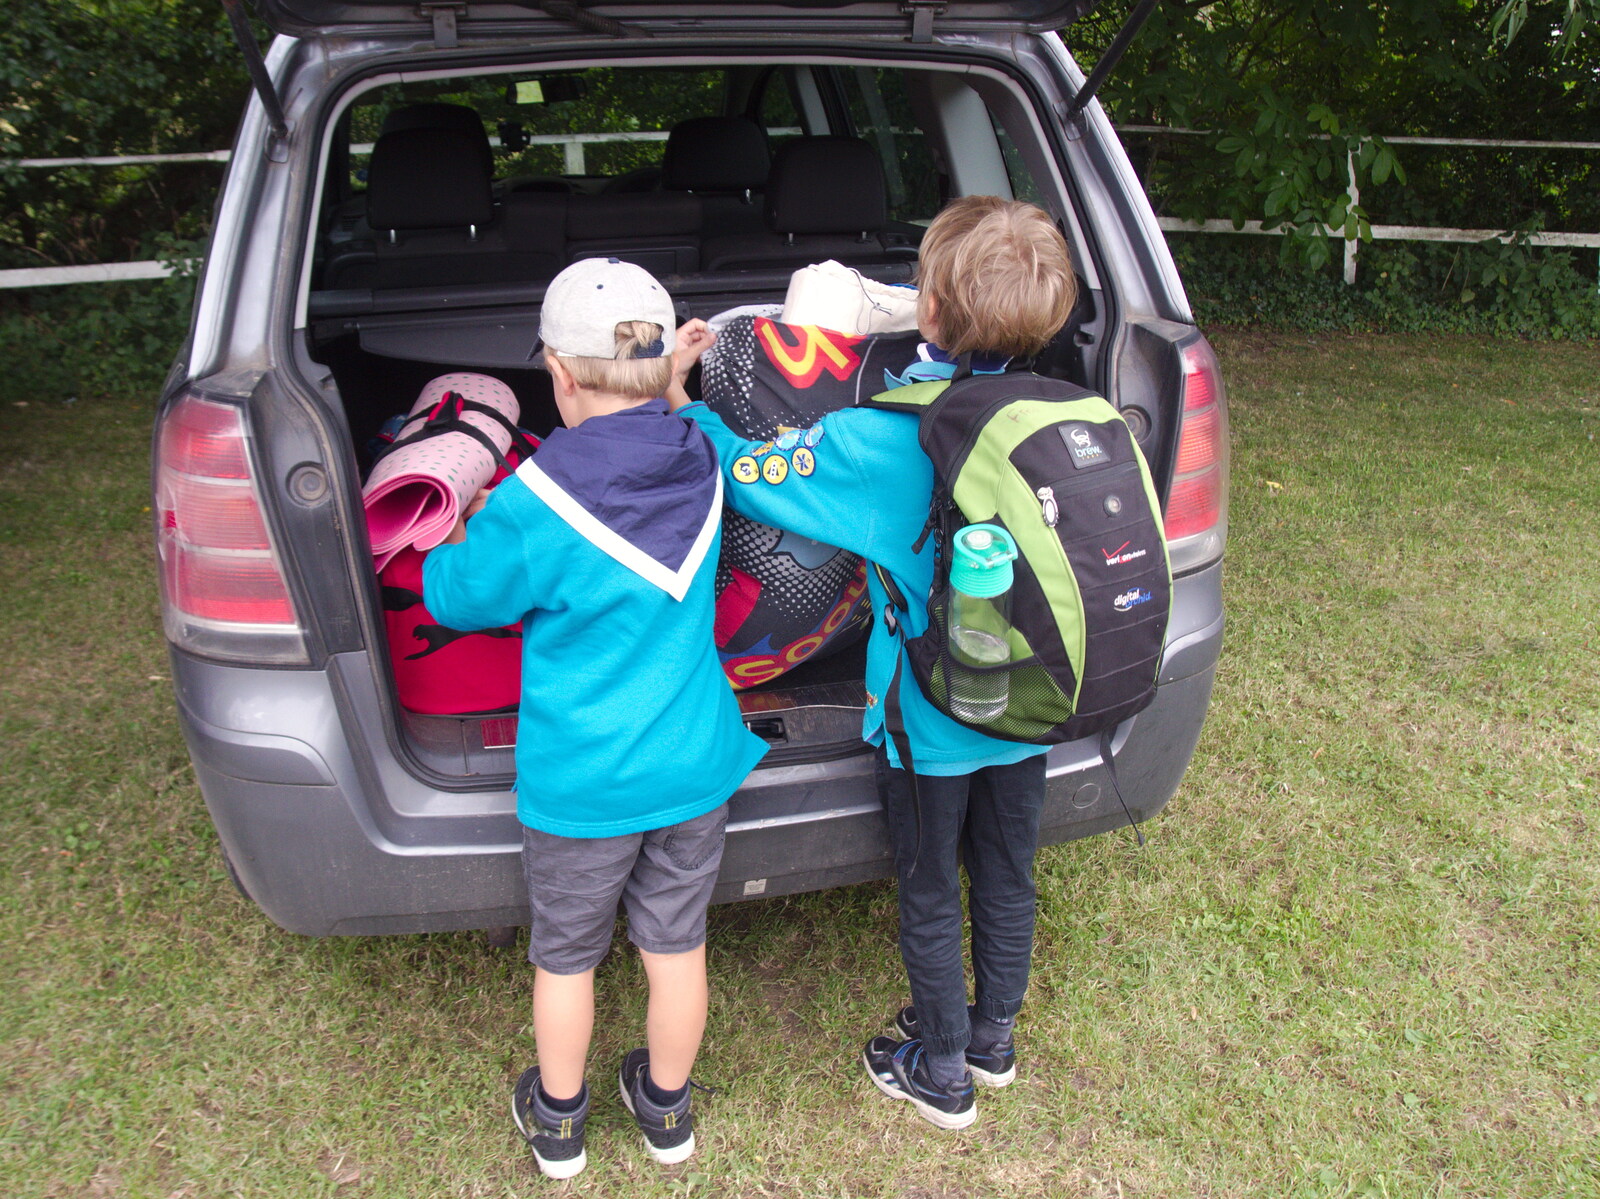 A Postcard from Boxford and BSCC at Pulham, Suffolk and Norfolk - 13th July 2019: Jacob and Harry haul their stuff out the boot